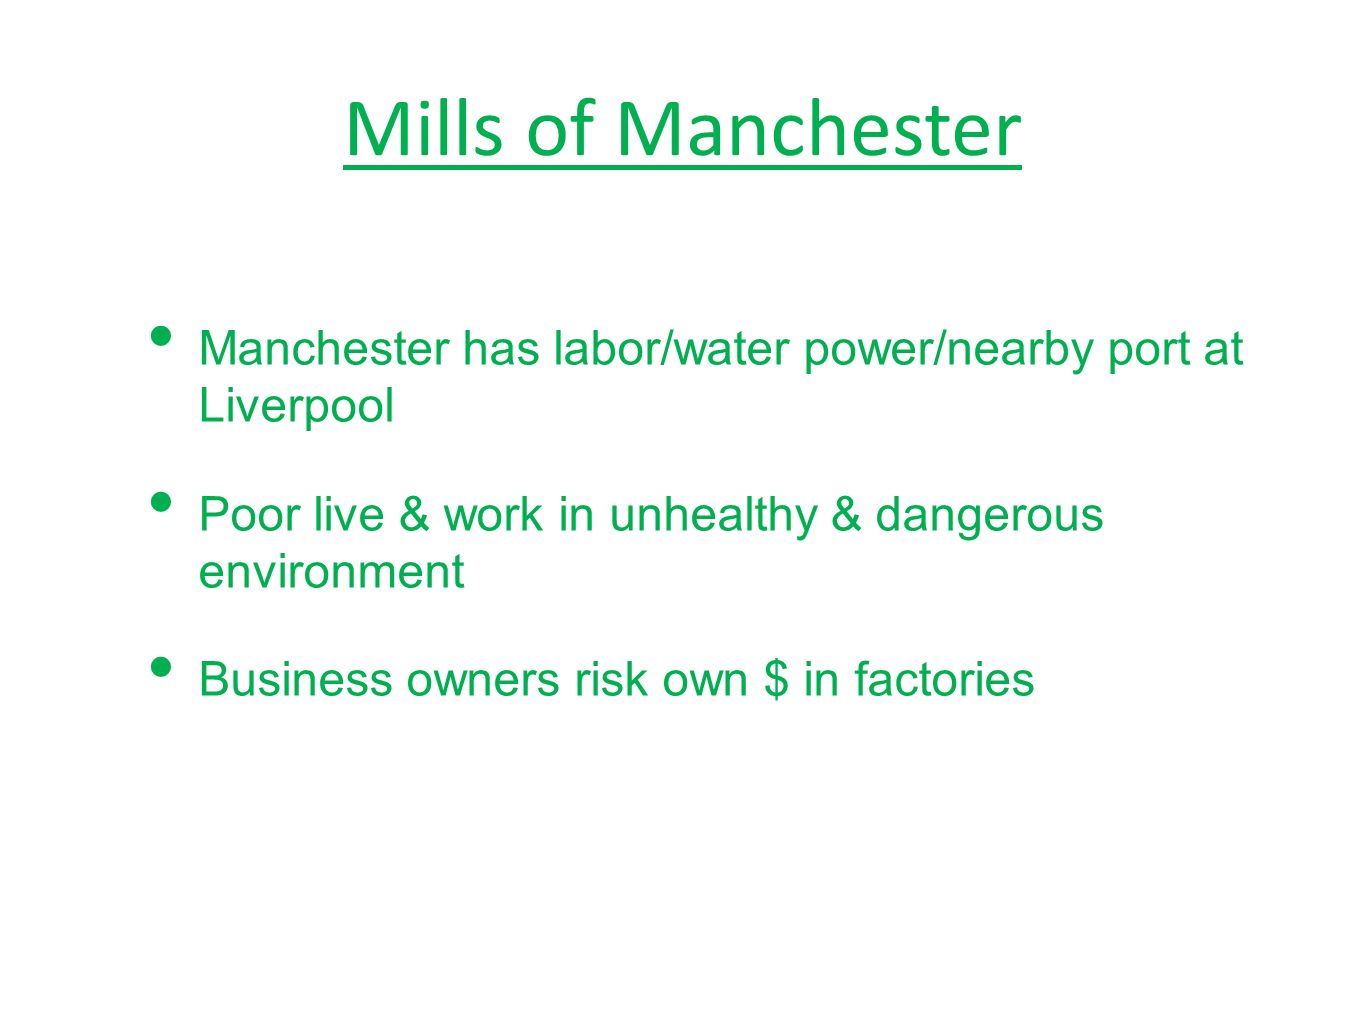 Mills of Manchester Manchester has labor/water power/nearby port at Liverpool Poor live & work in unhealthy & dangerous environment Business owners risk own $ in factories